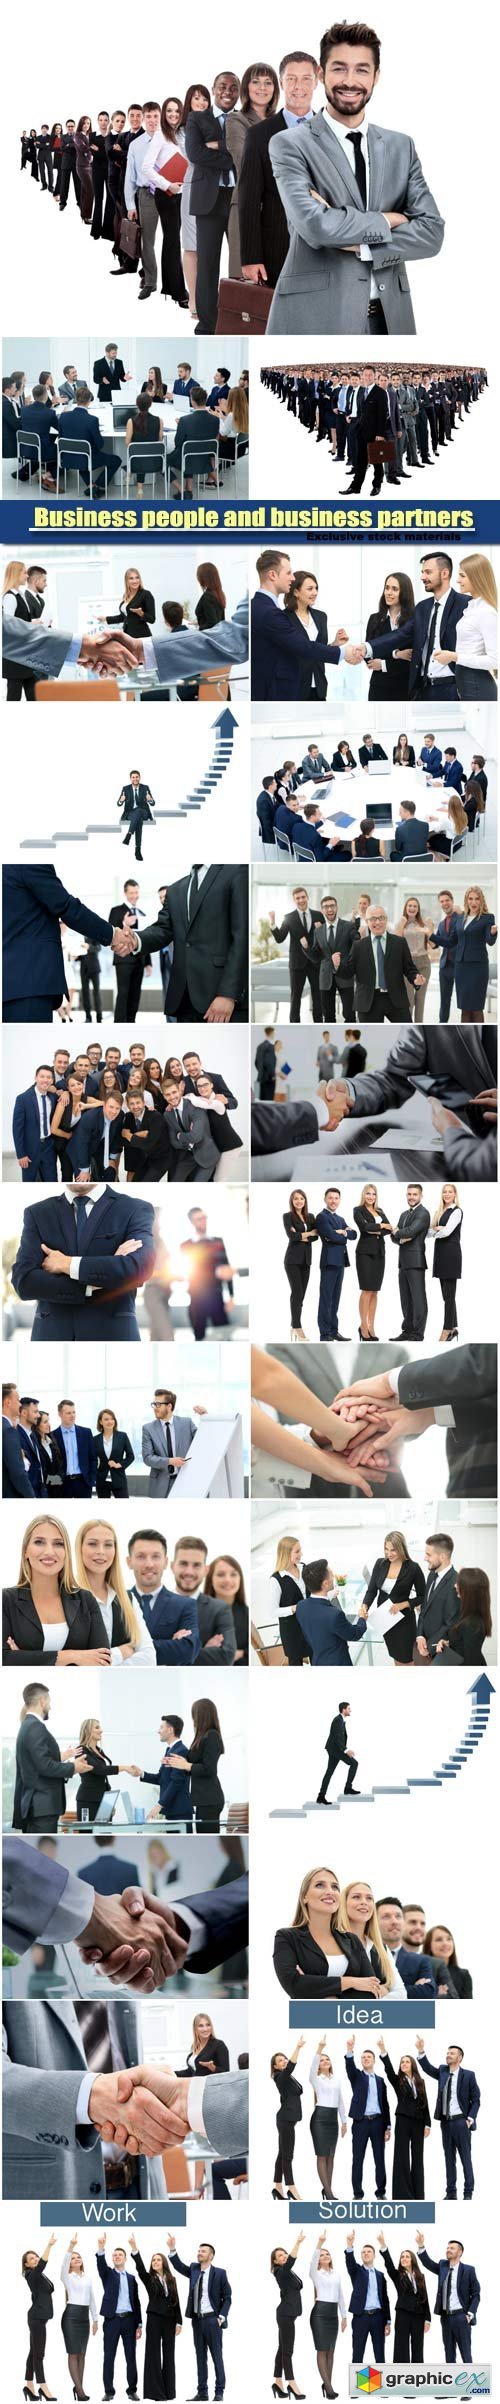 Business people and business partners greeting each other with handshake, conference